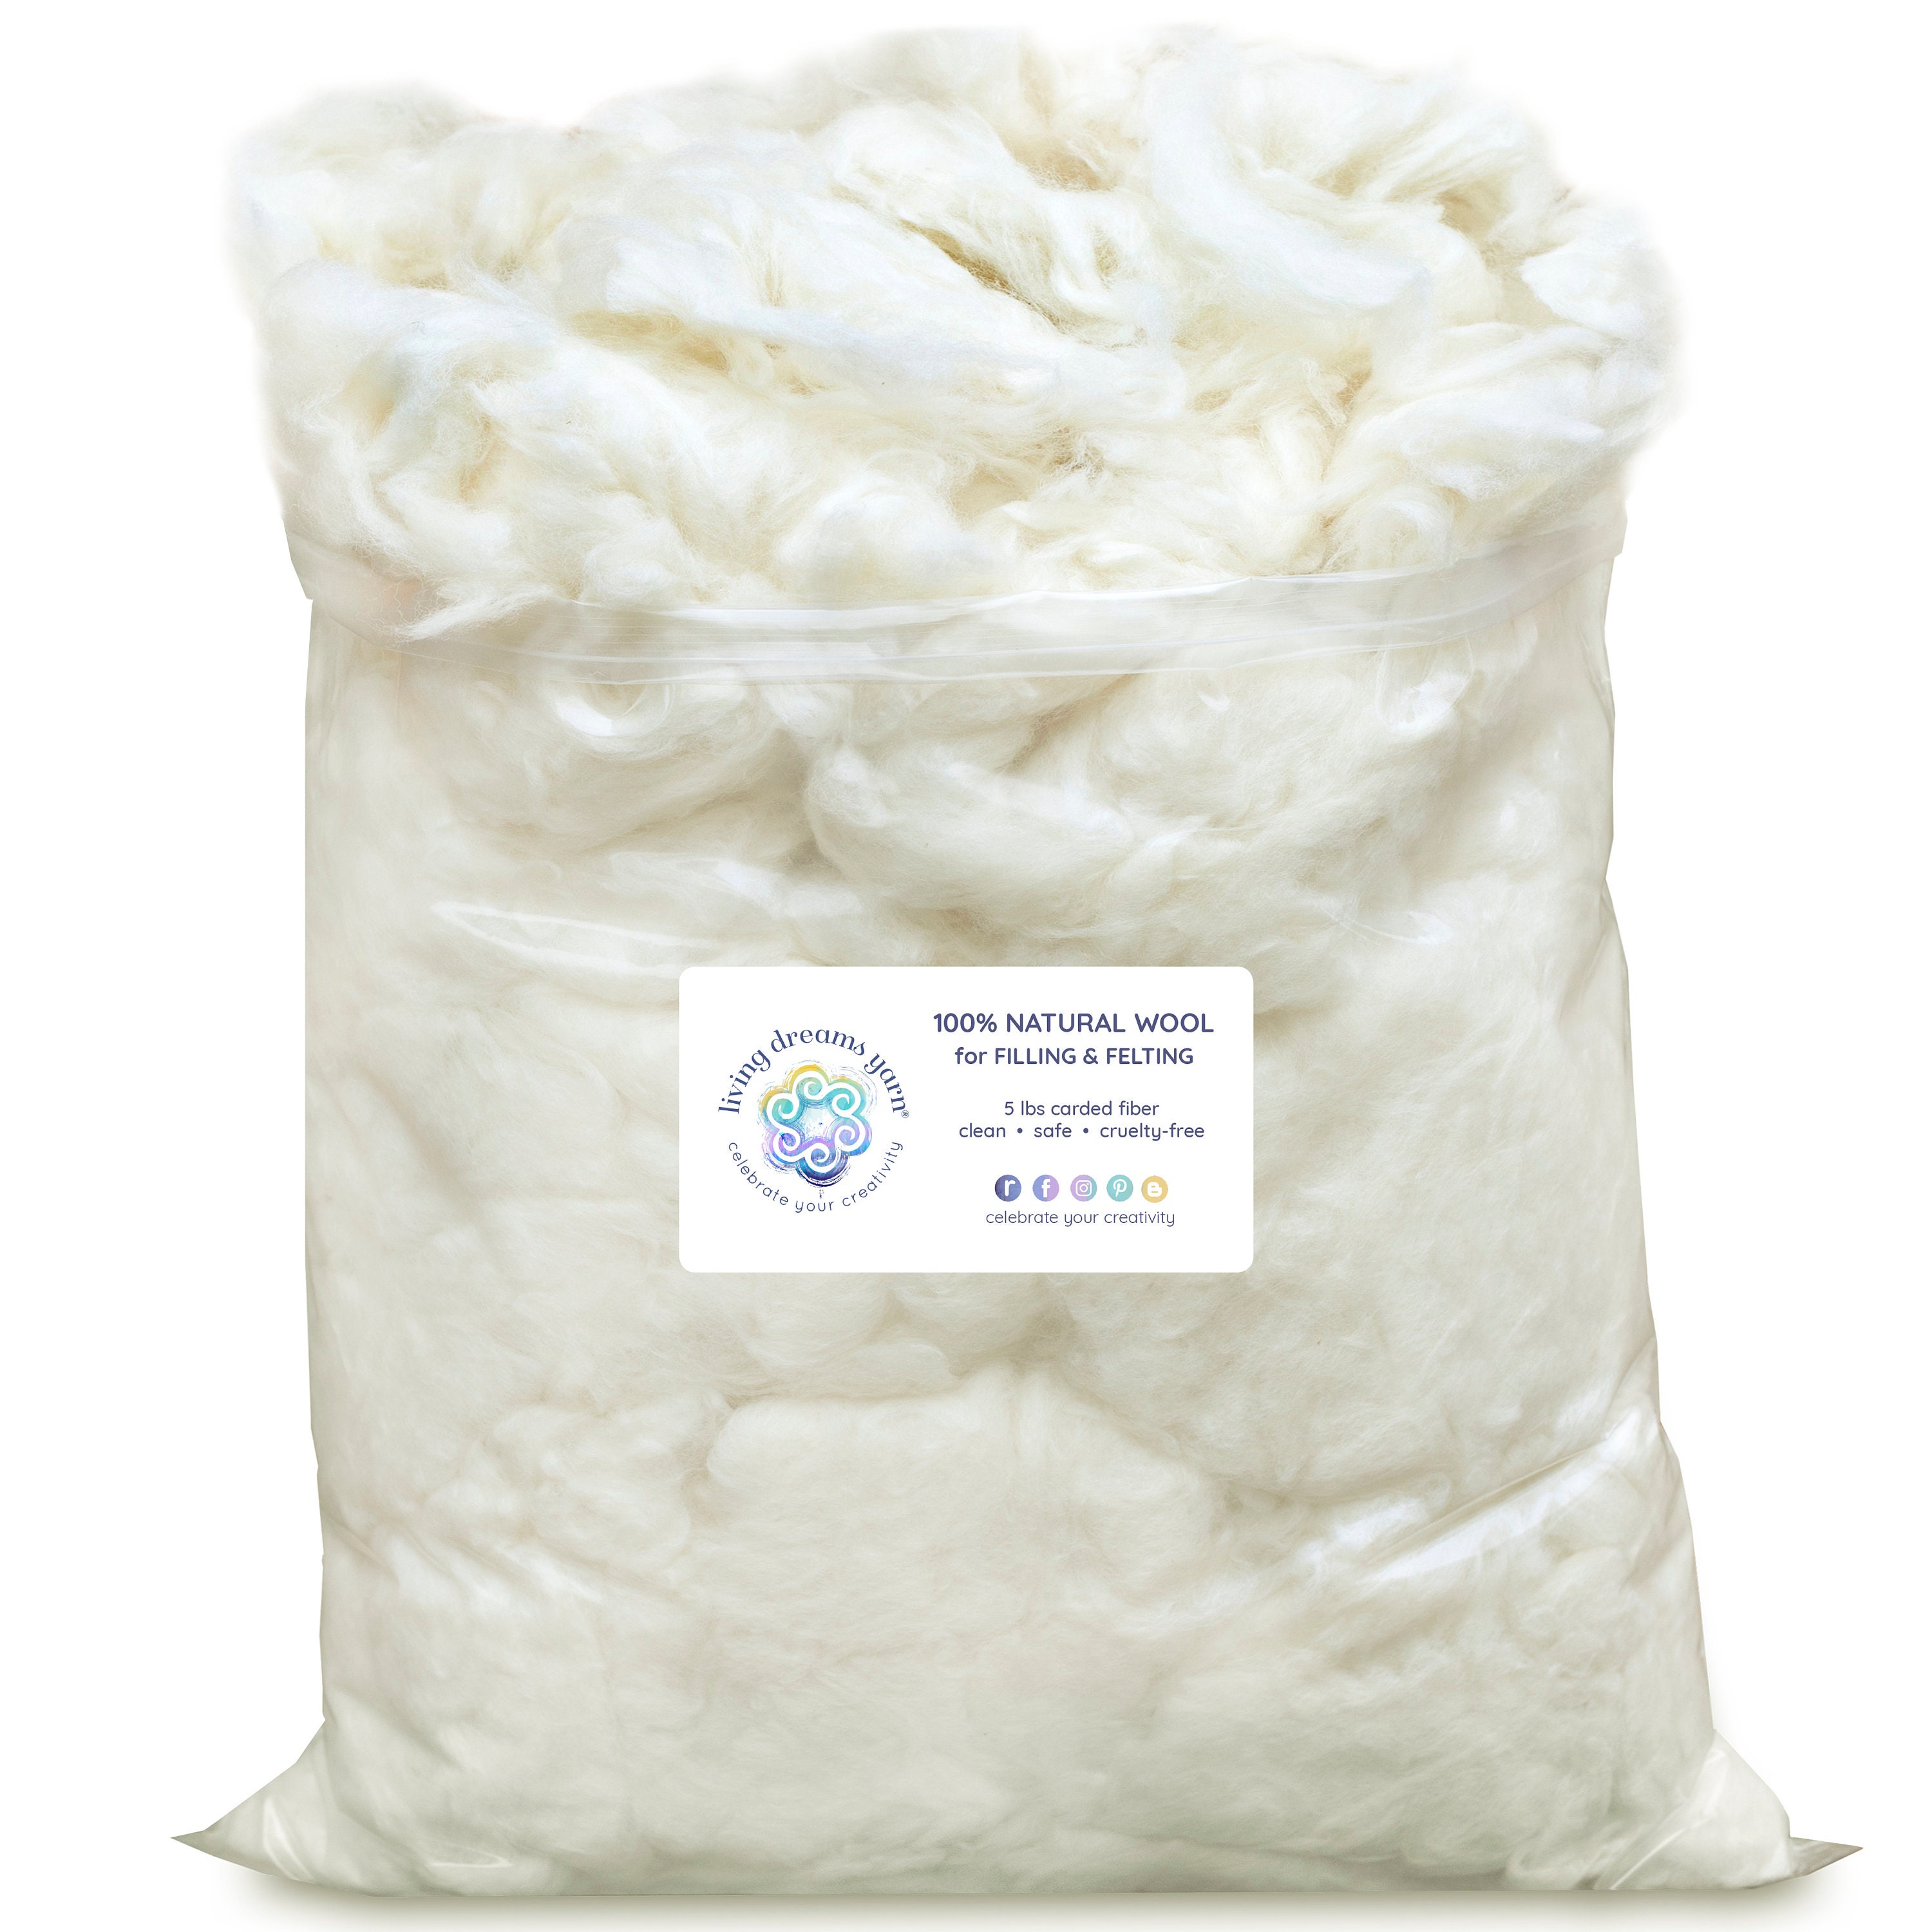 5 LB SUPER CLEAN Core Wool Filler for Stuffing Toys or Pillows